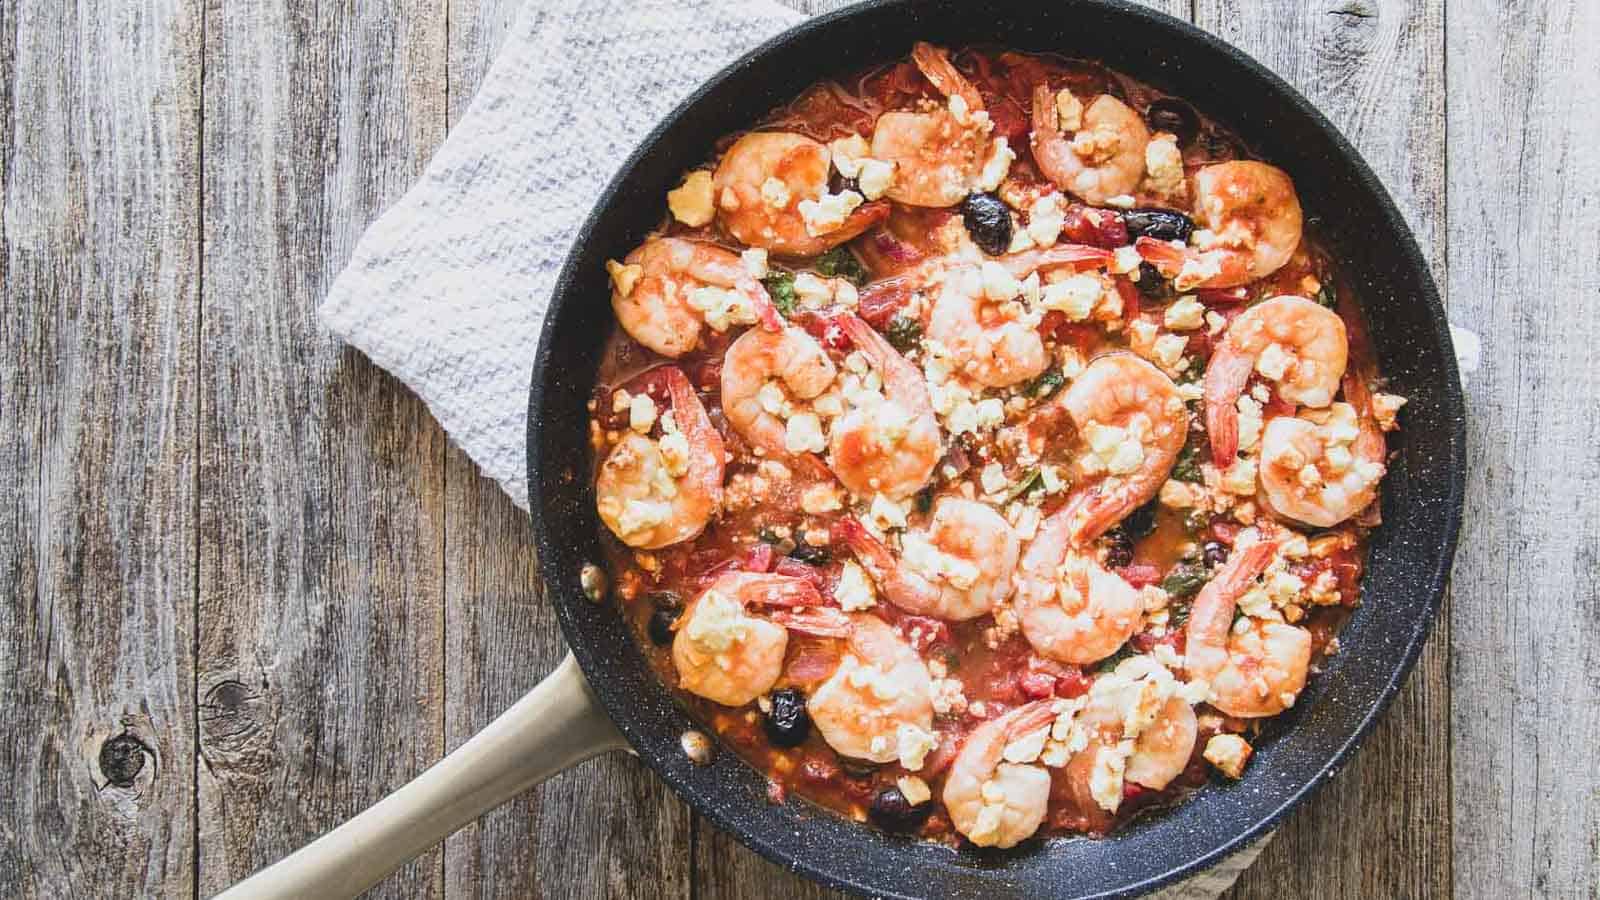 Mondays suck; these 19 one-skillet dinners don't